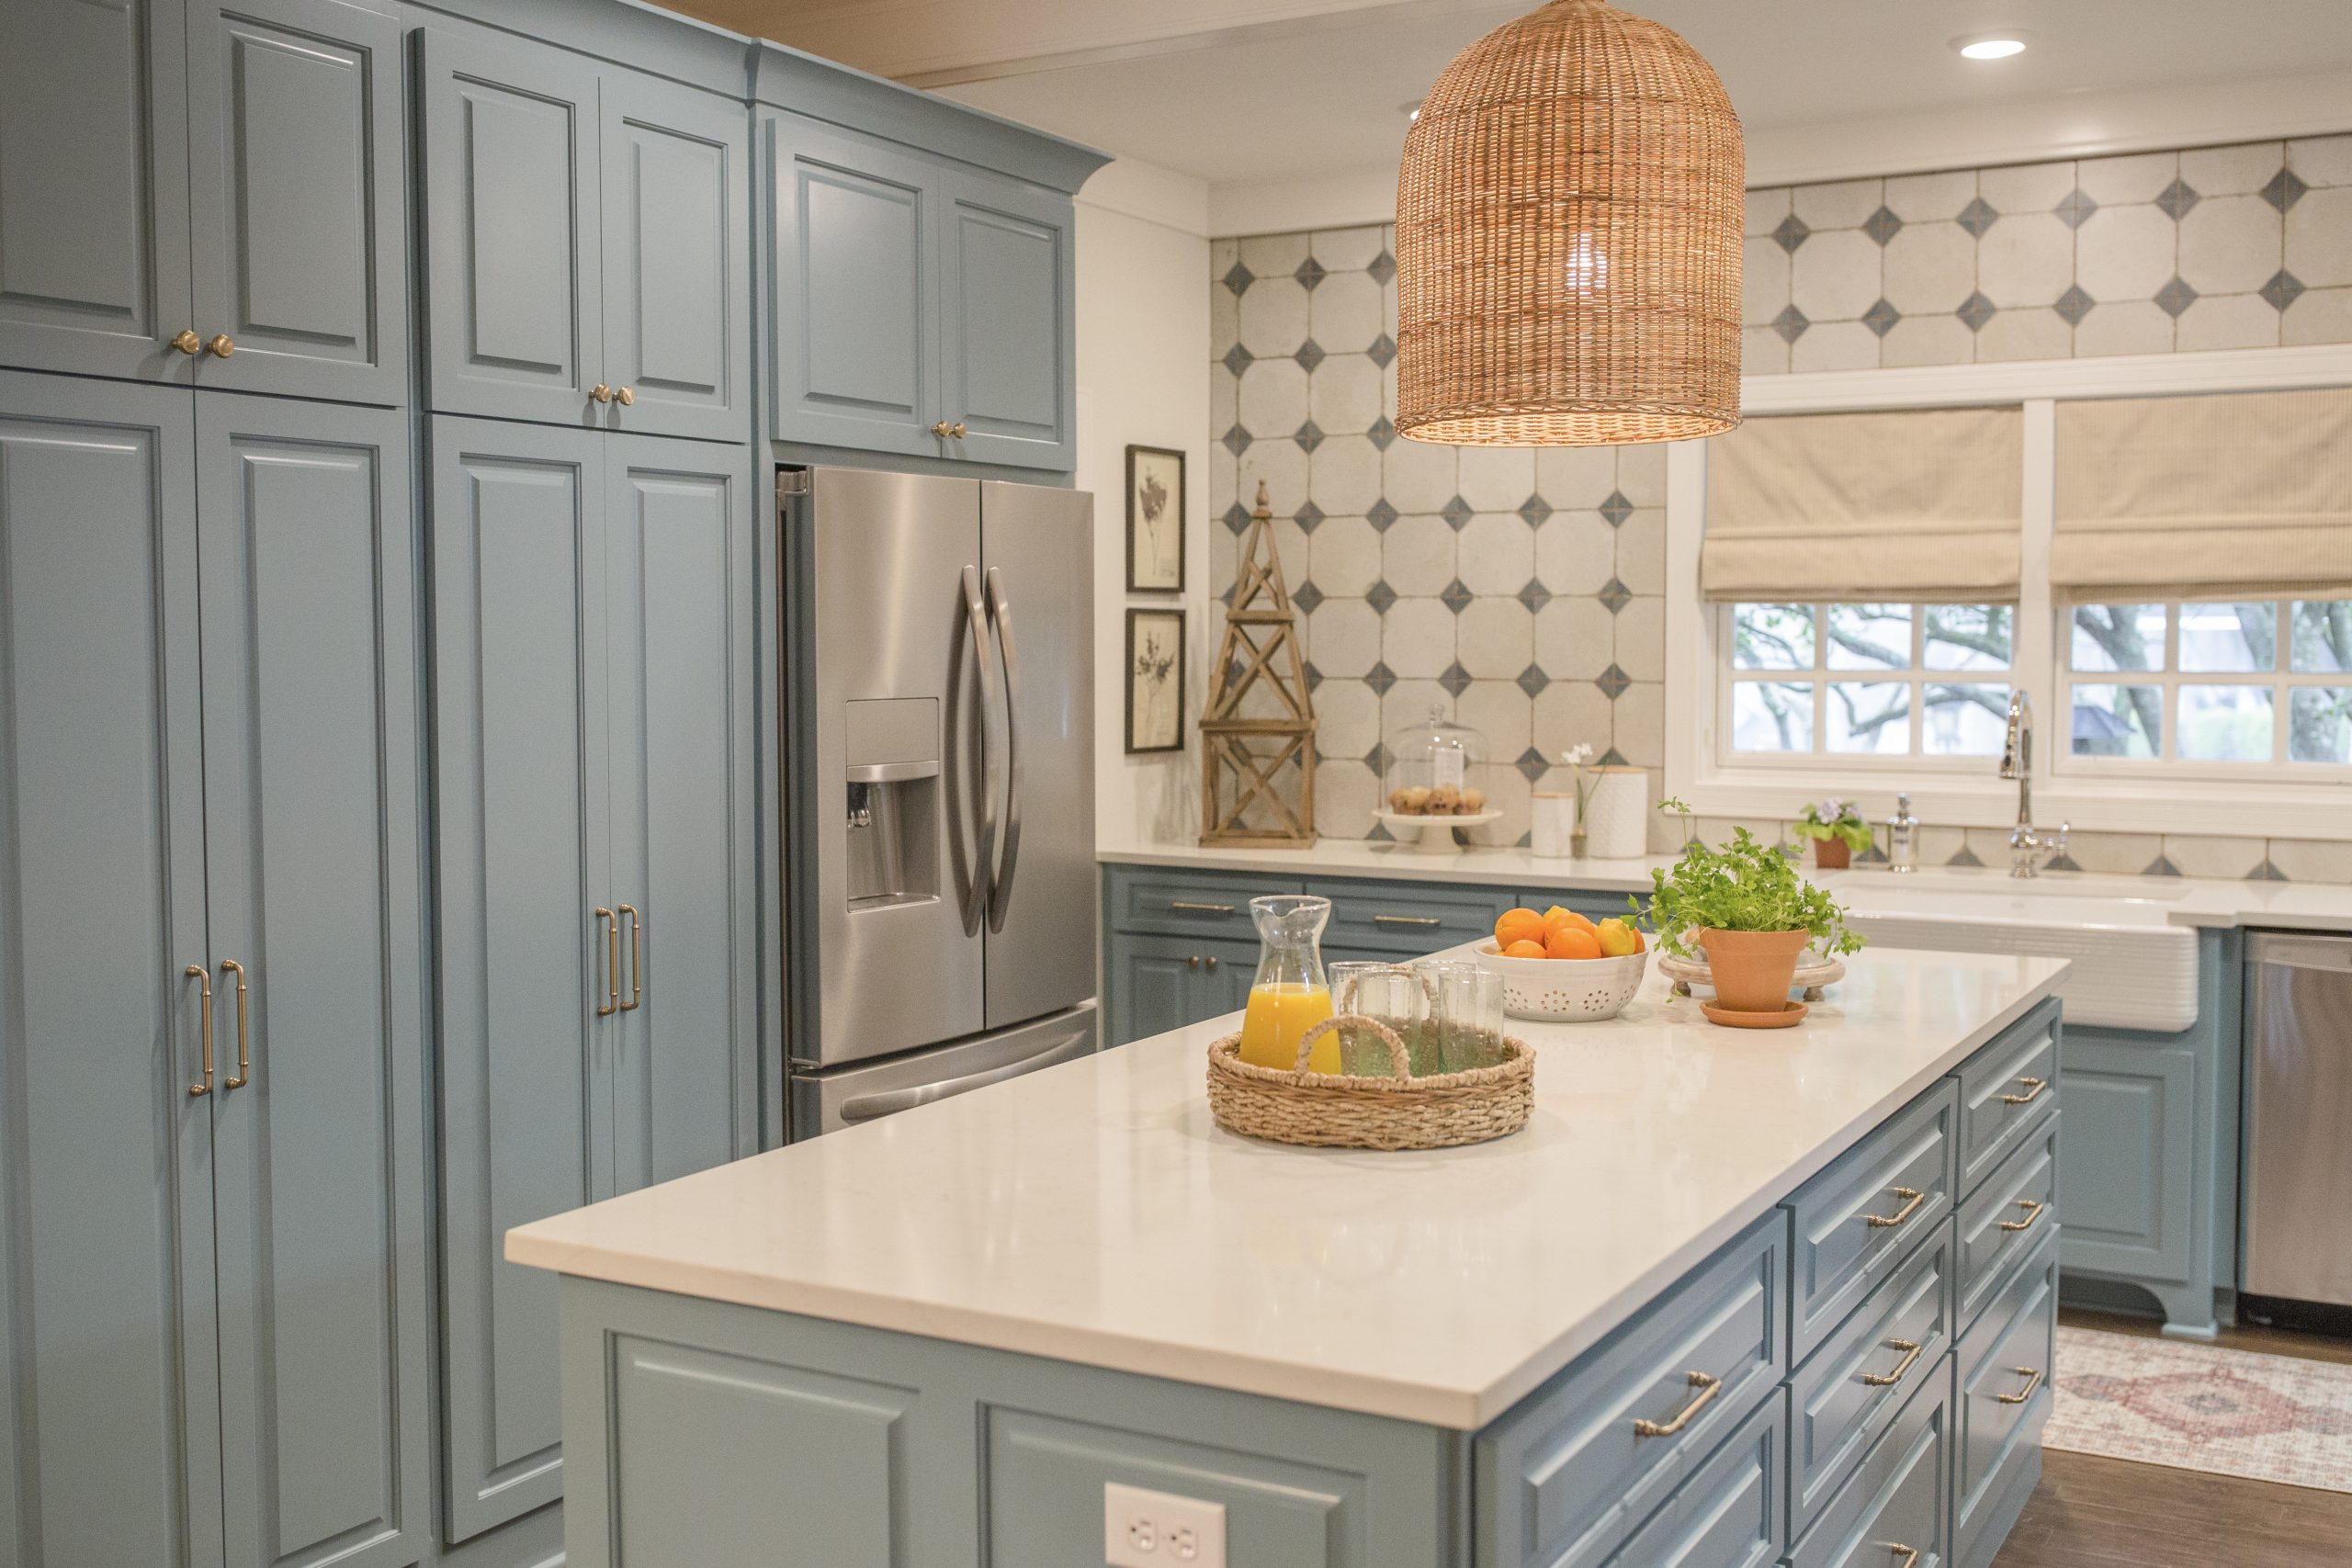 A beachy blue and white kitchen